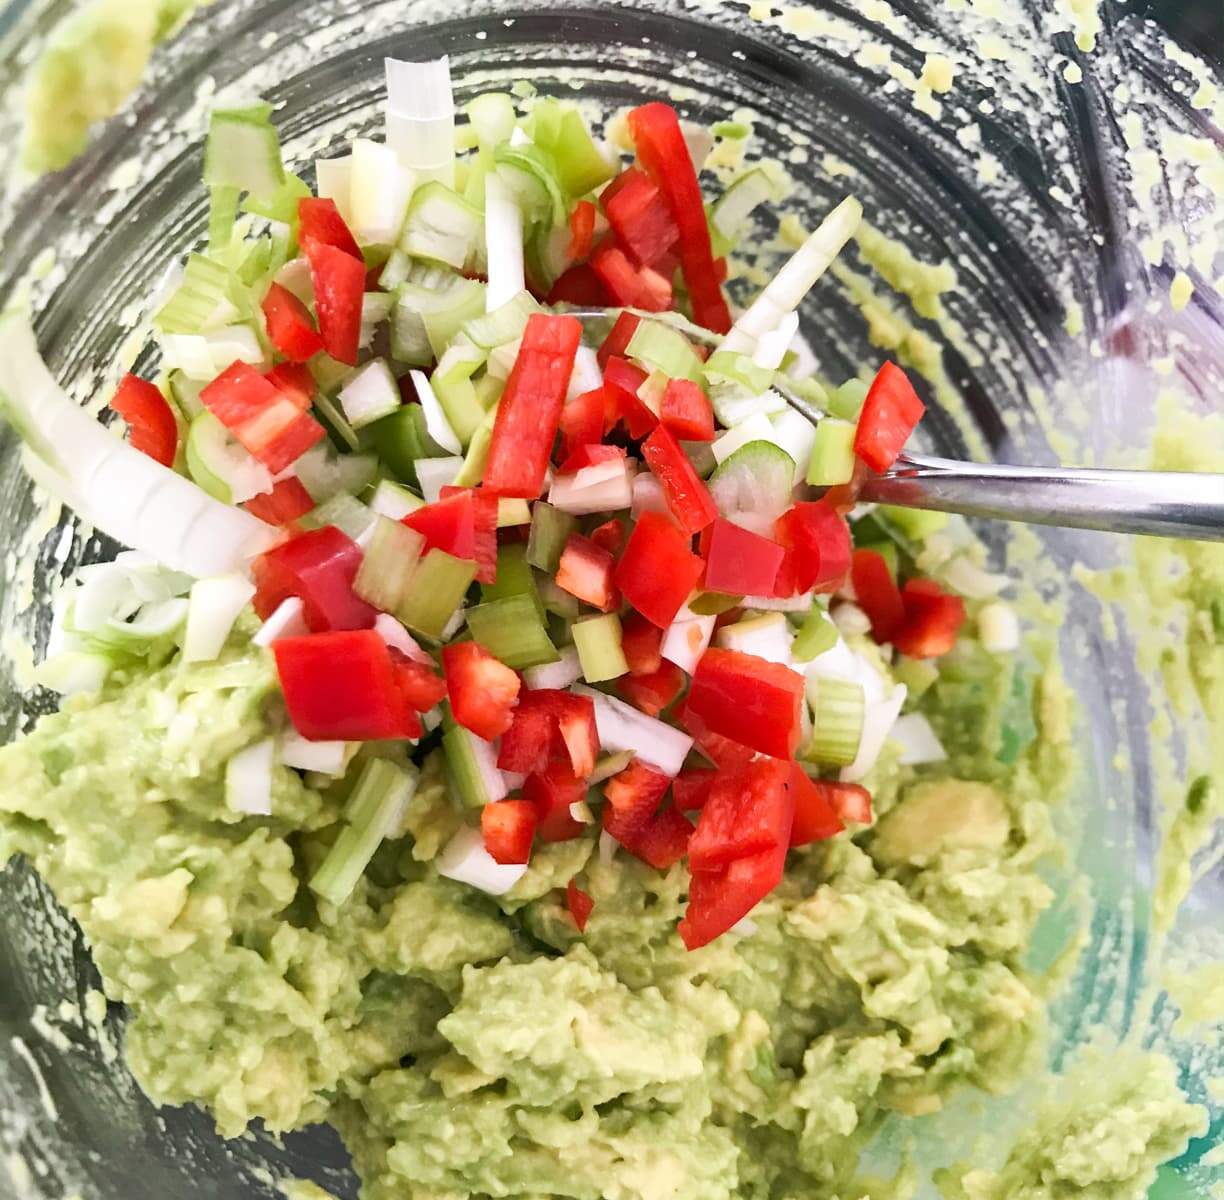 Smashed avocado with finely diced chillies and spring onions being add to make guacamole.